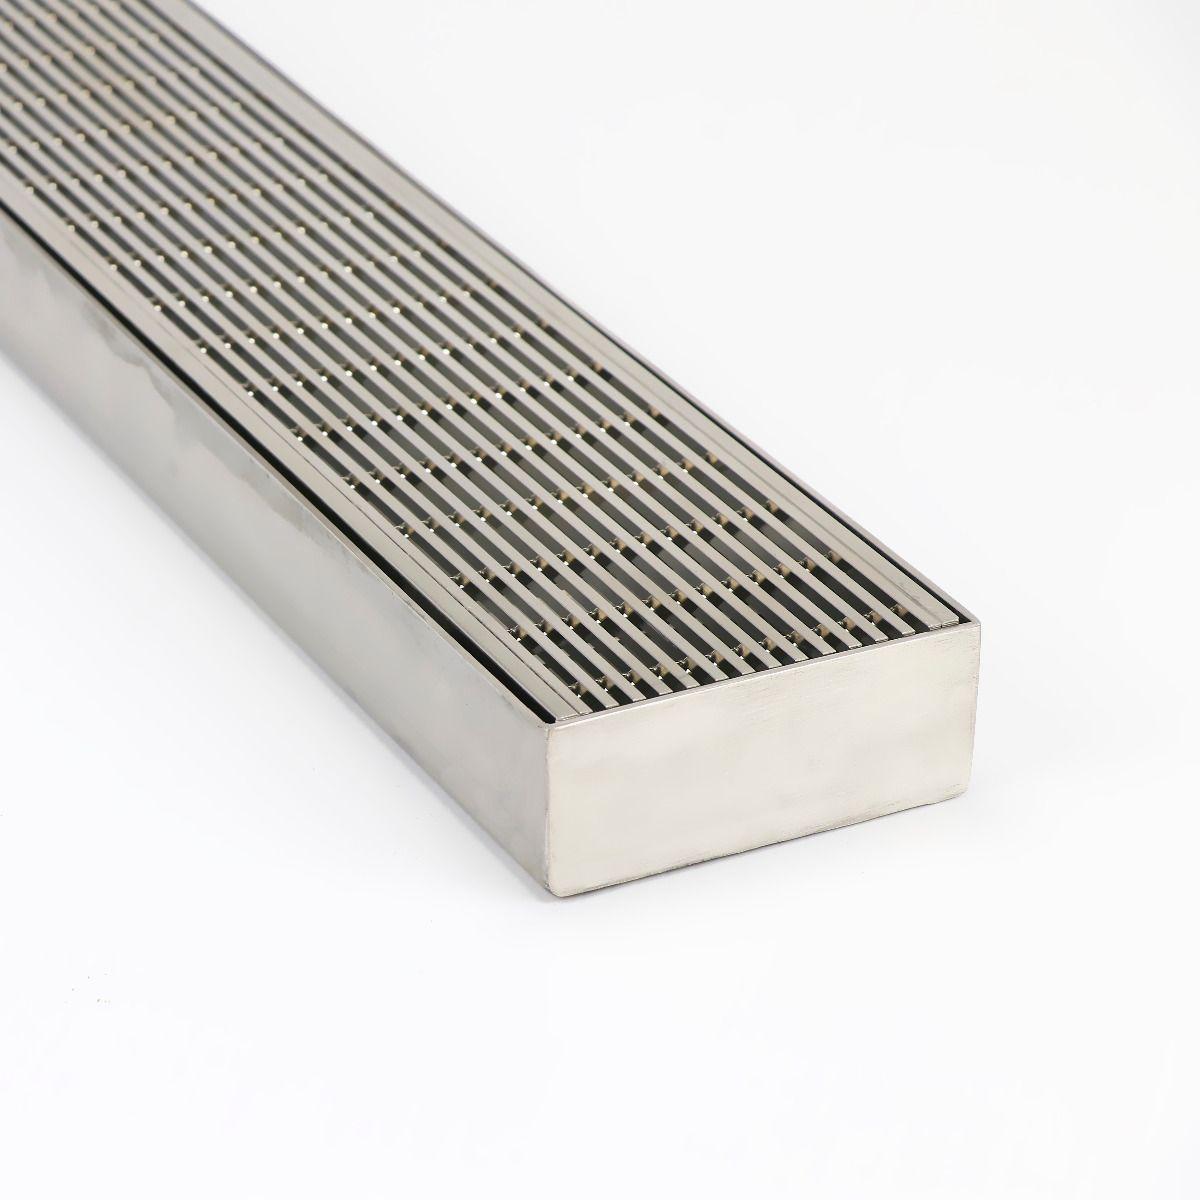 Electropolishing: The Perfect Finish for Stainless Steel Drains